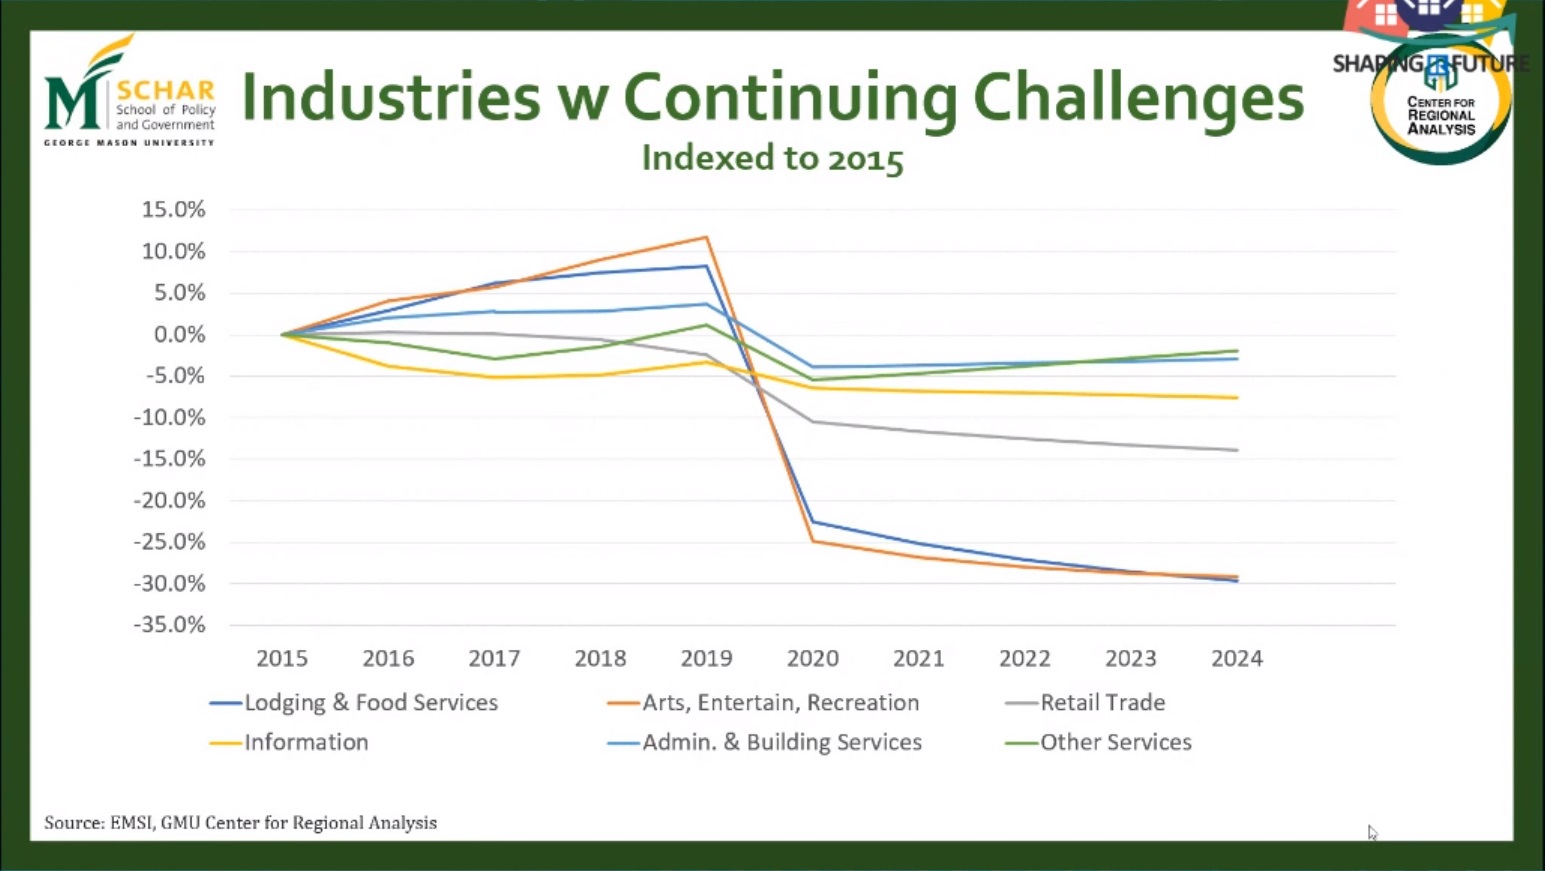 Industries with challenges